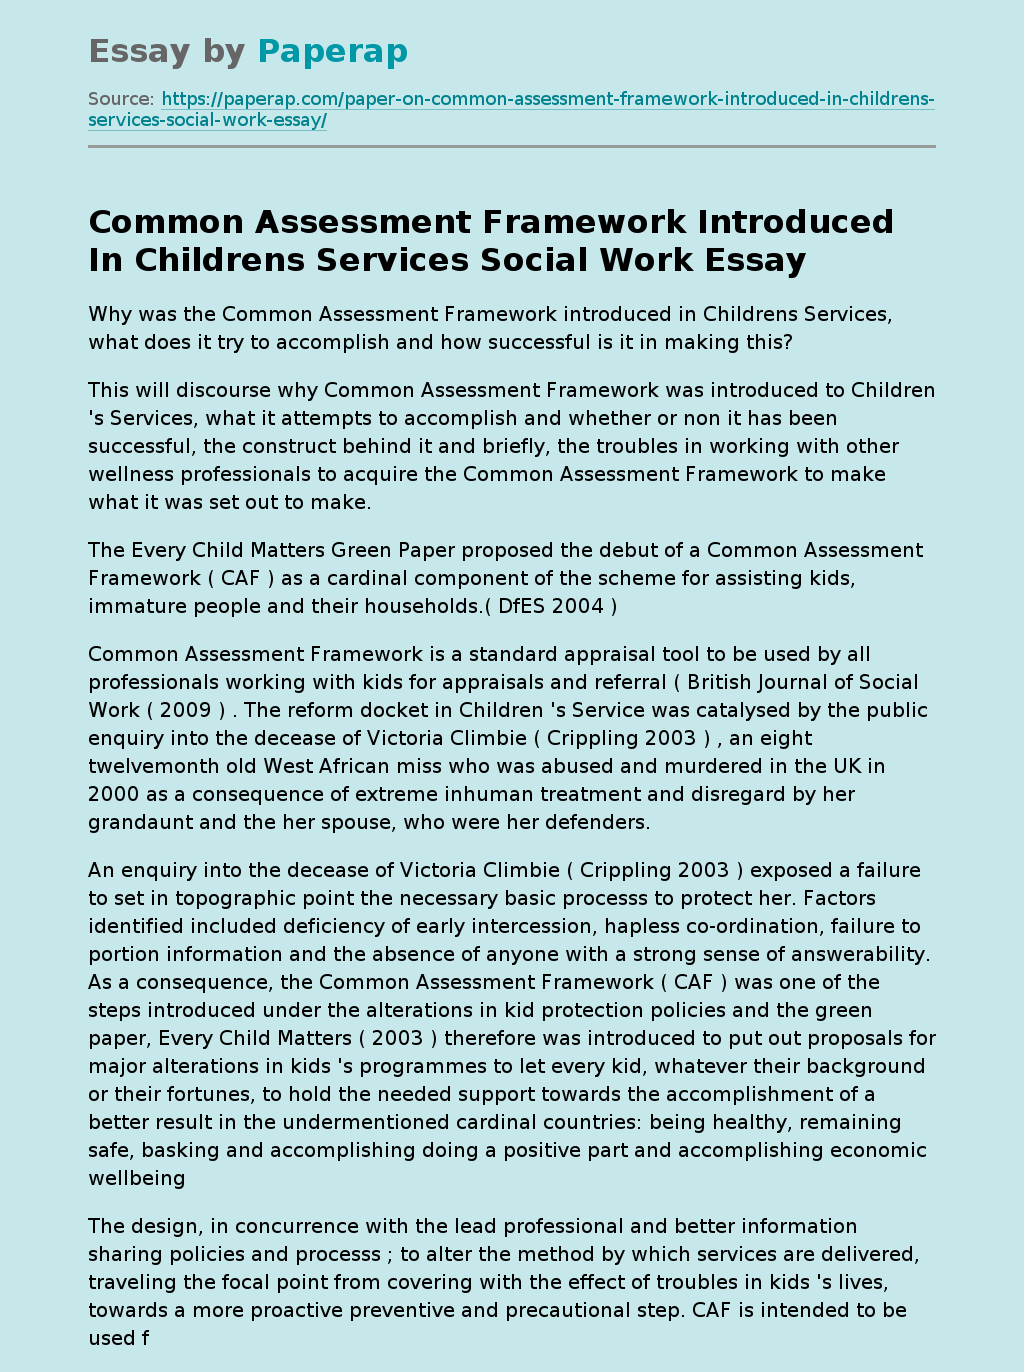 Common Assessment Framework Introduced In Childrens Services Social Work